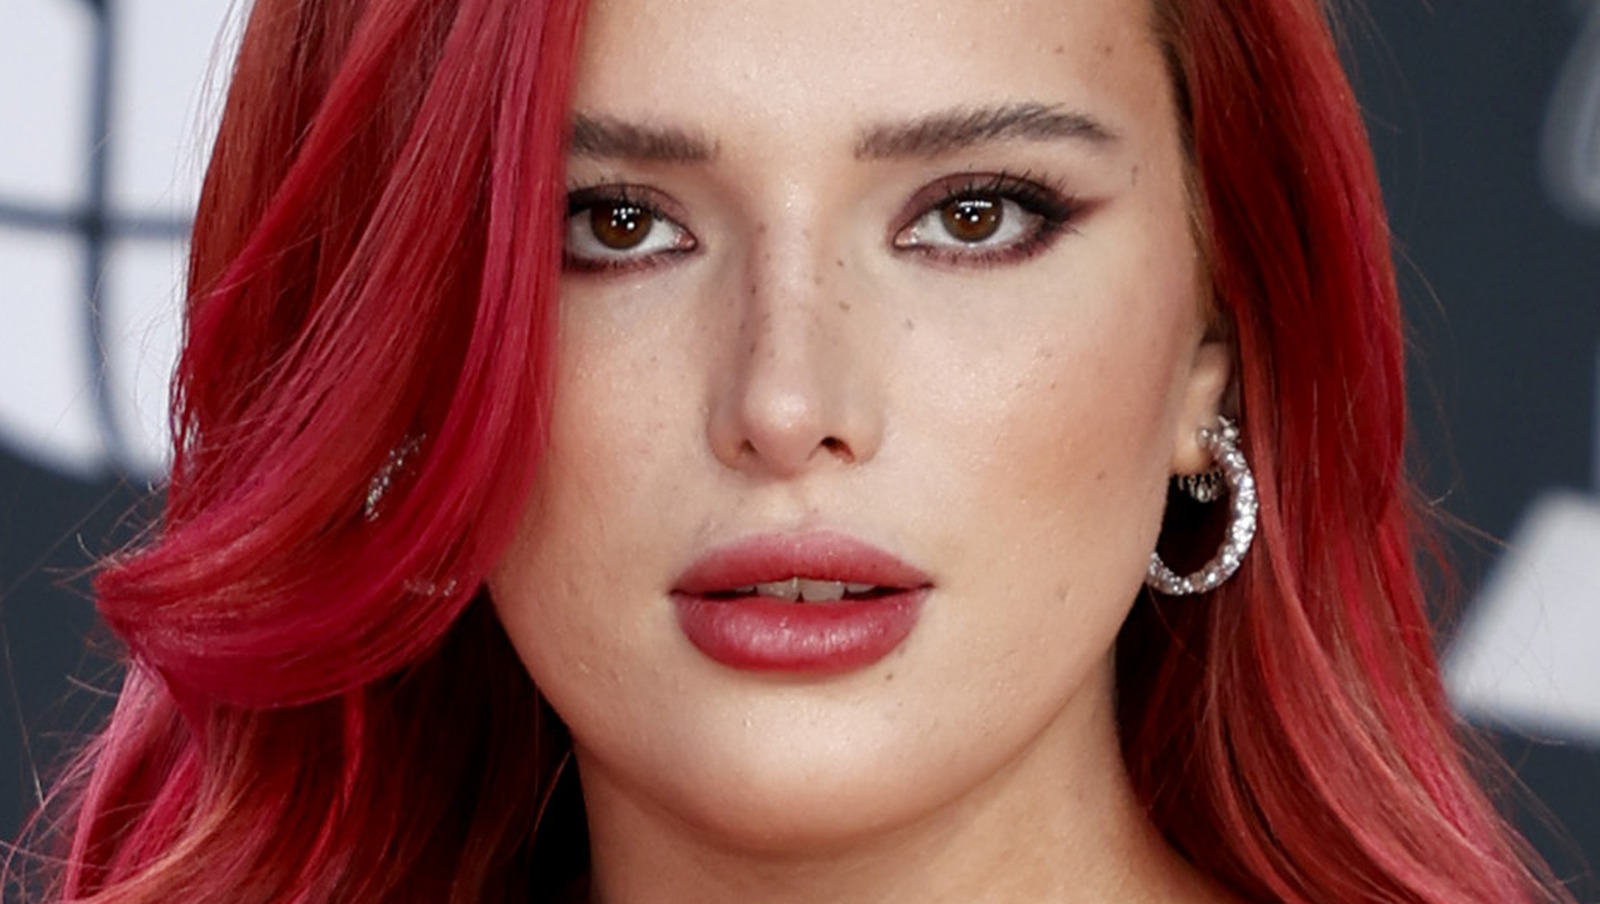 Bella Thorne Is Facing Romance Rumors With Another Famous Actor